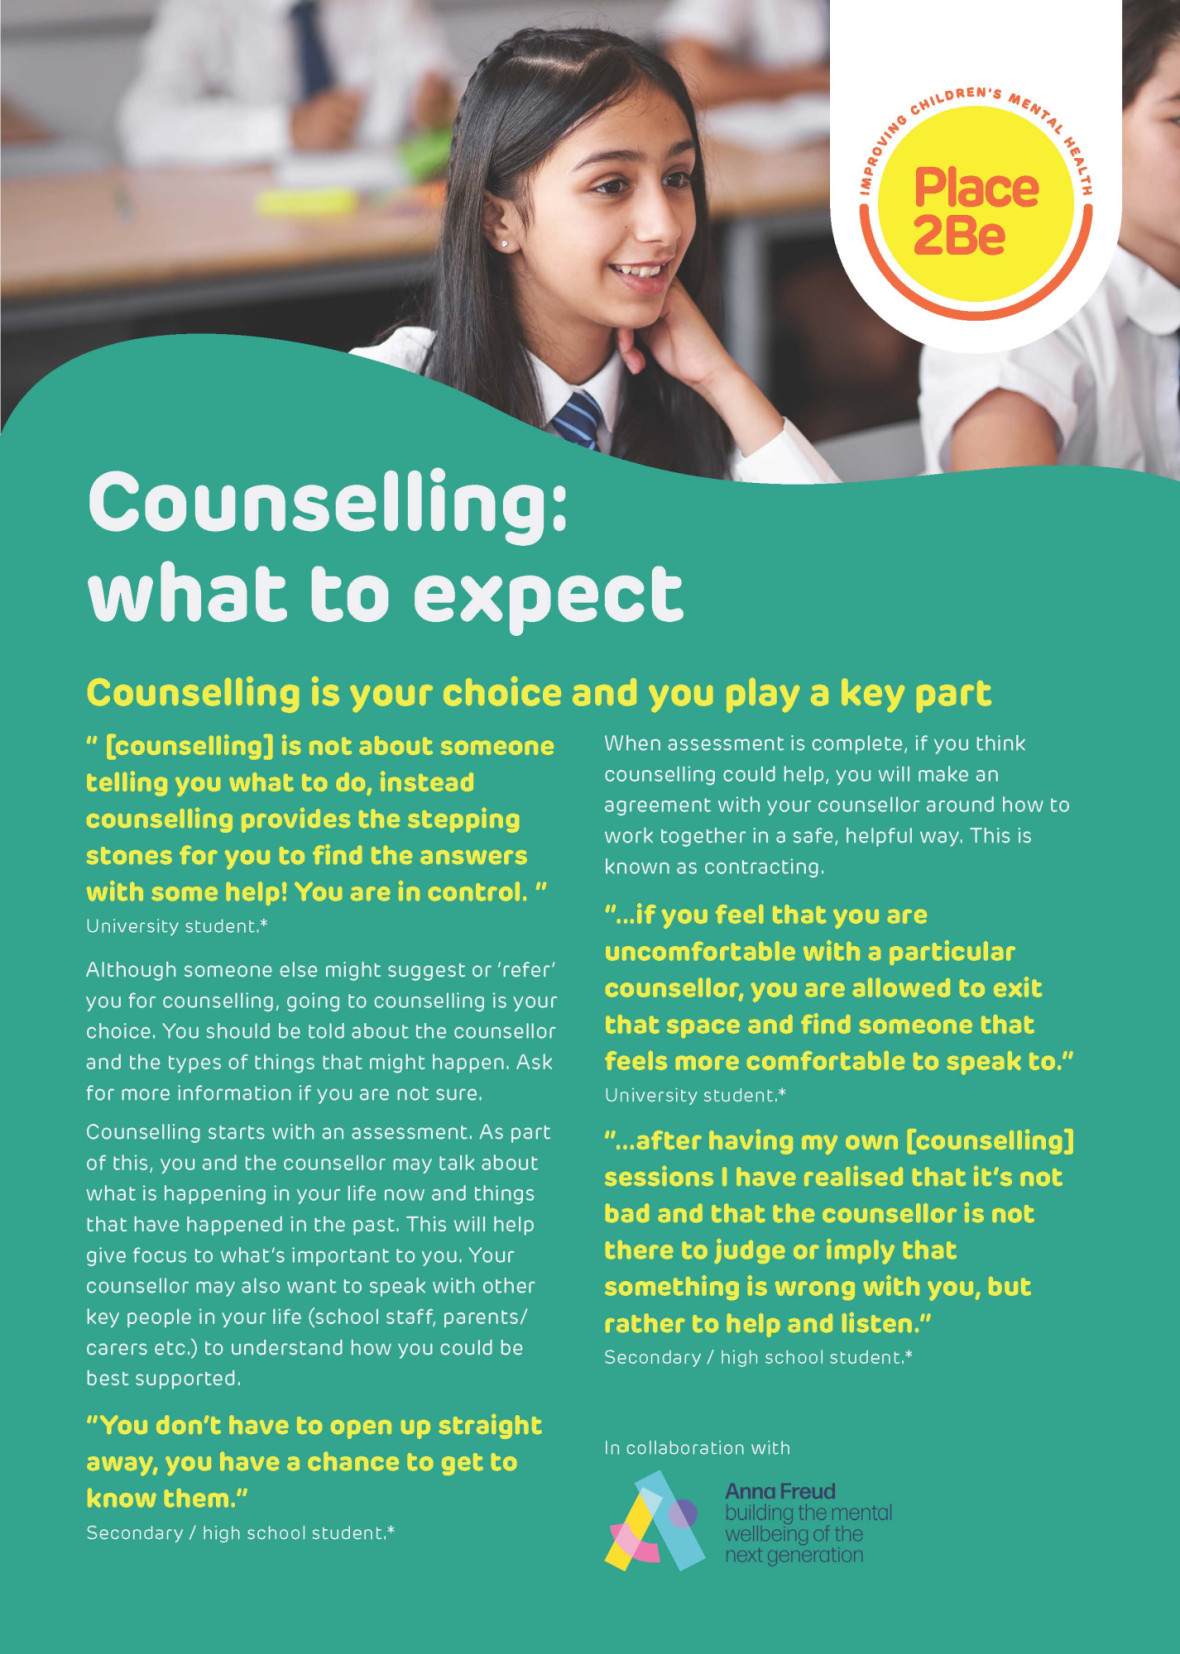 Counselling - what to expect 2_Page_1